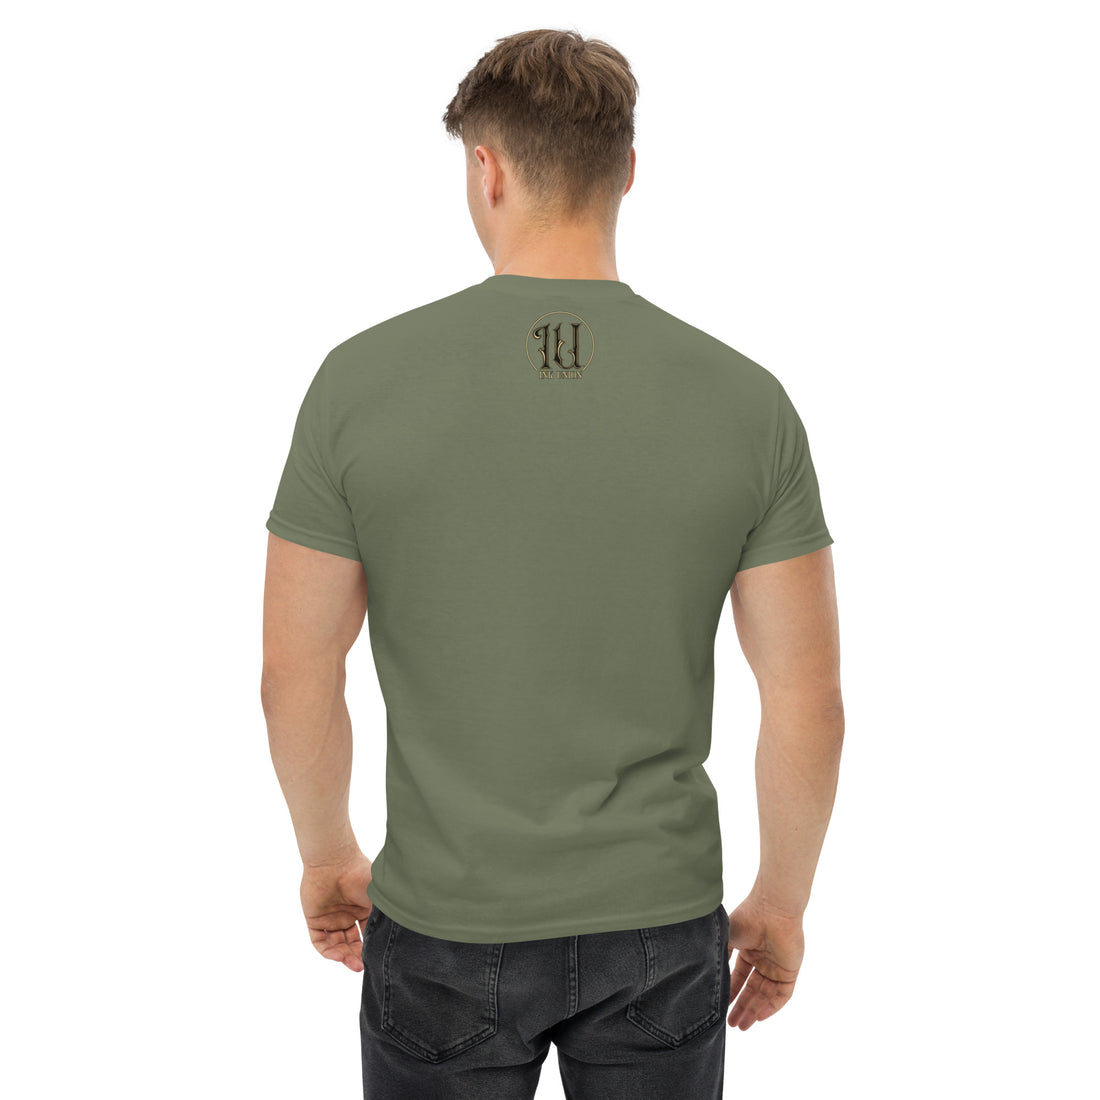 The back view is of an attractive man wearing a olive green t-shirt with a small gold and black Ink Union badge Logo centered just under the neckline.